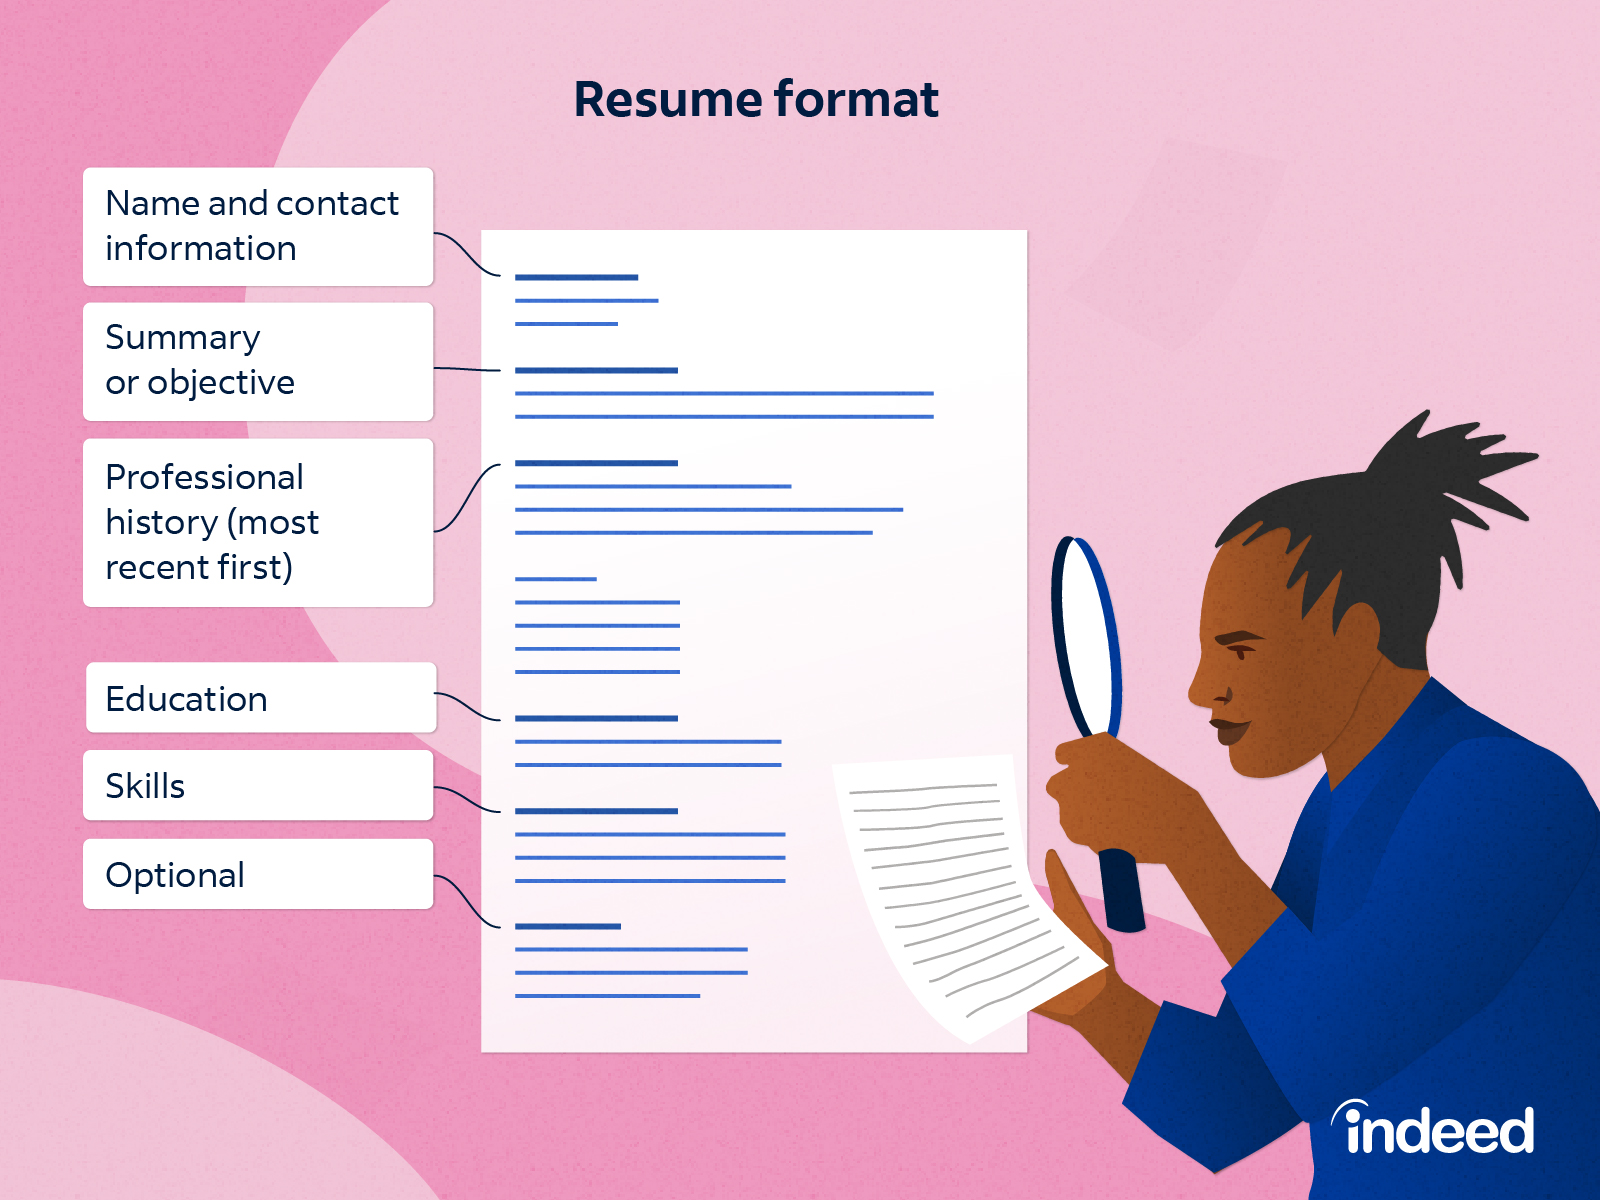 Types of Resumes: Choosing the Right Format For Your Needs